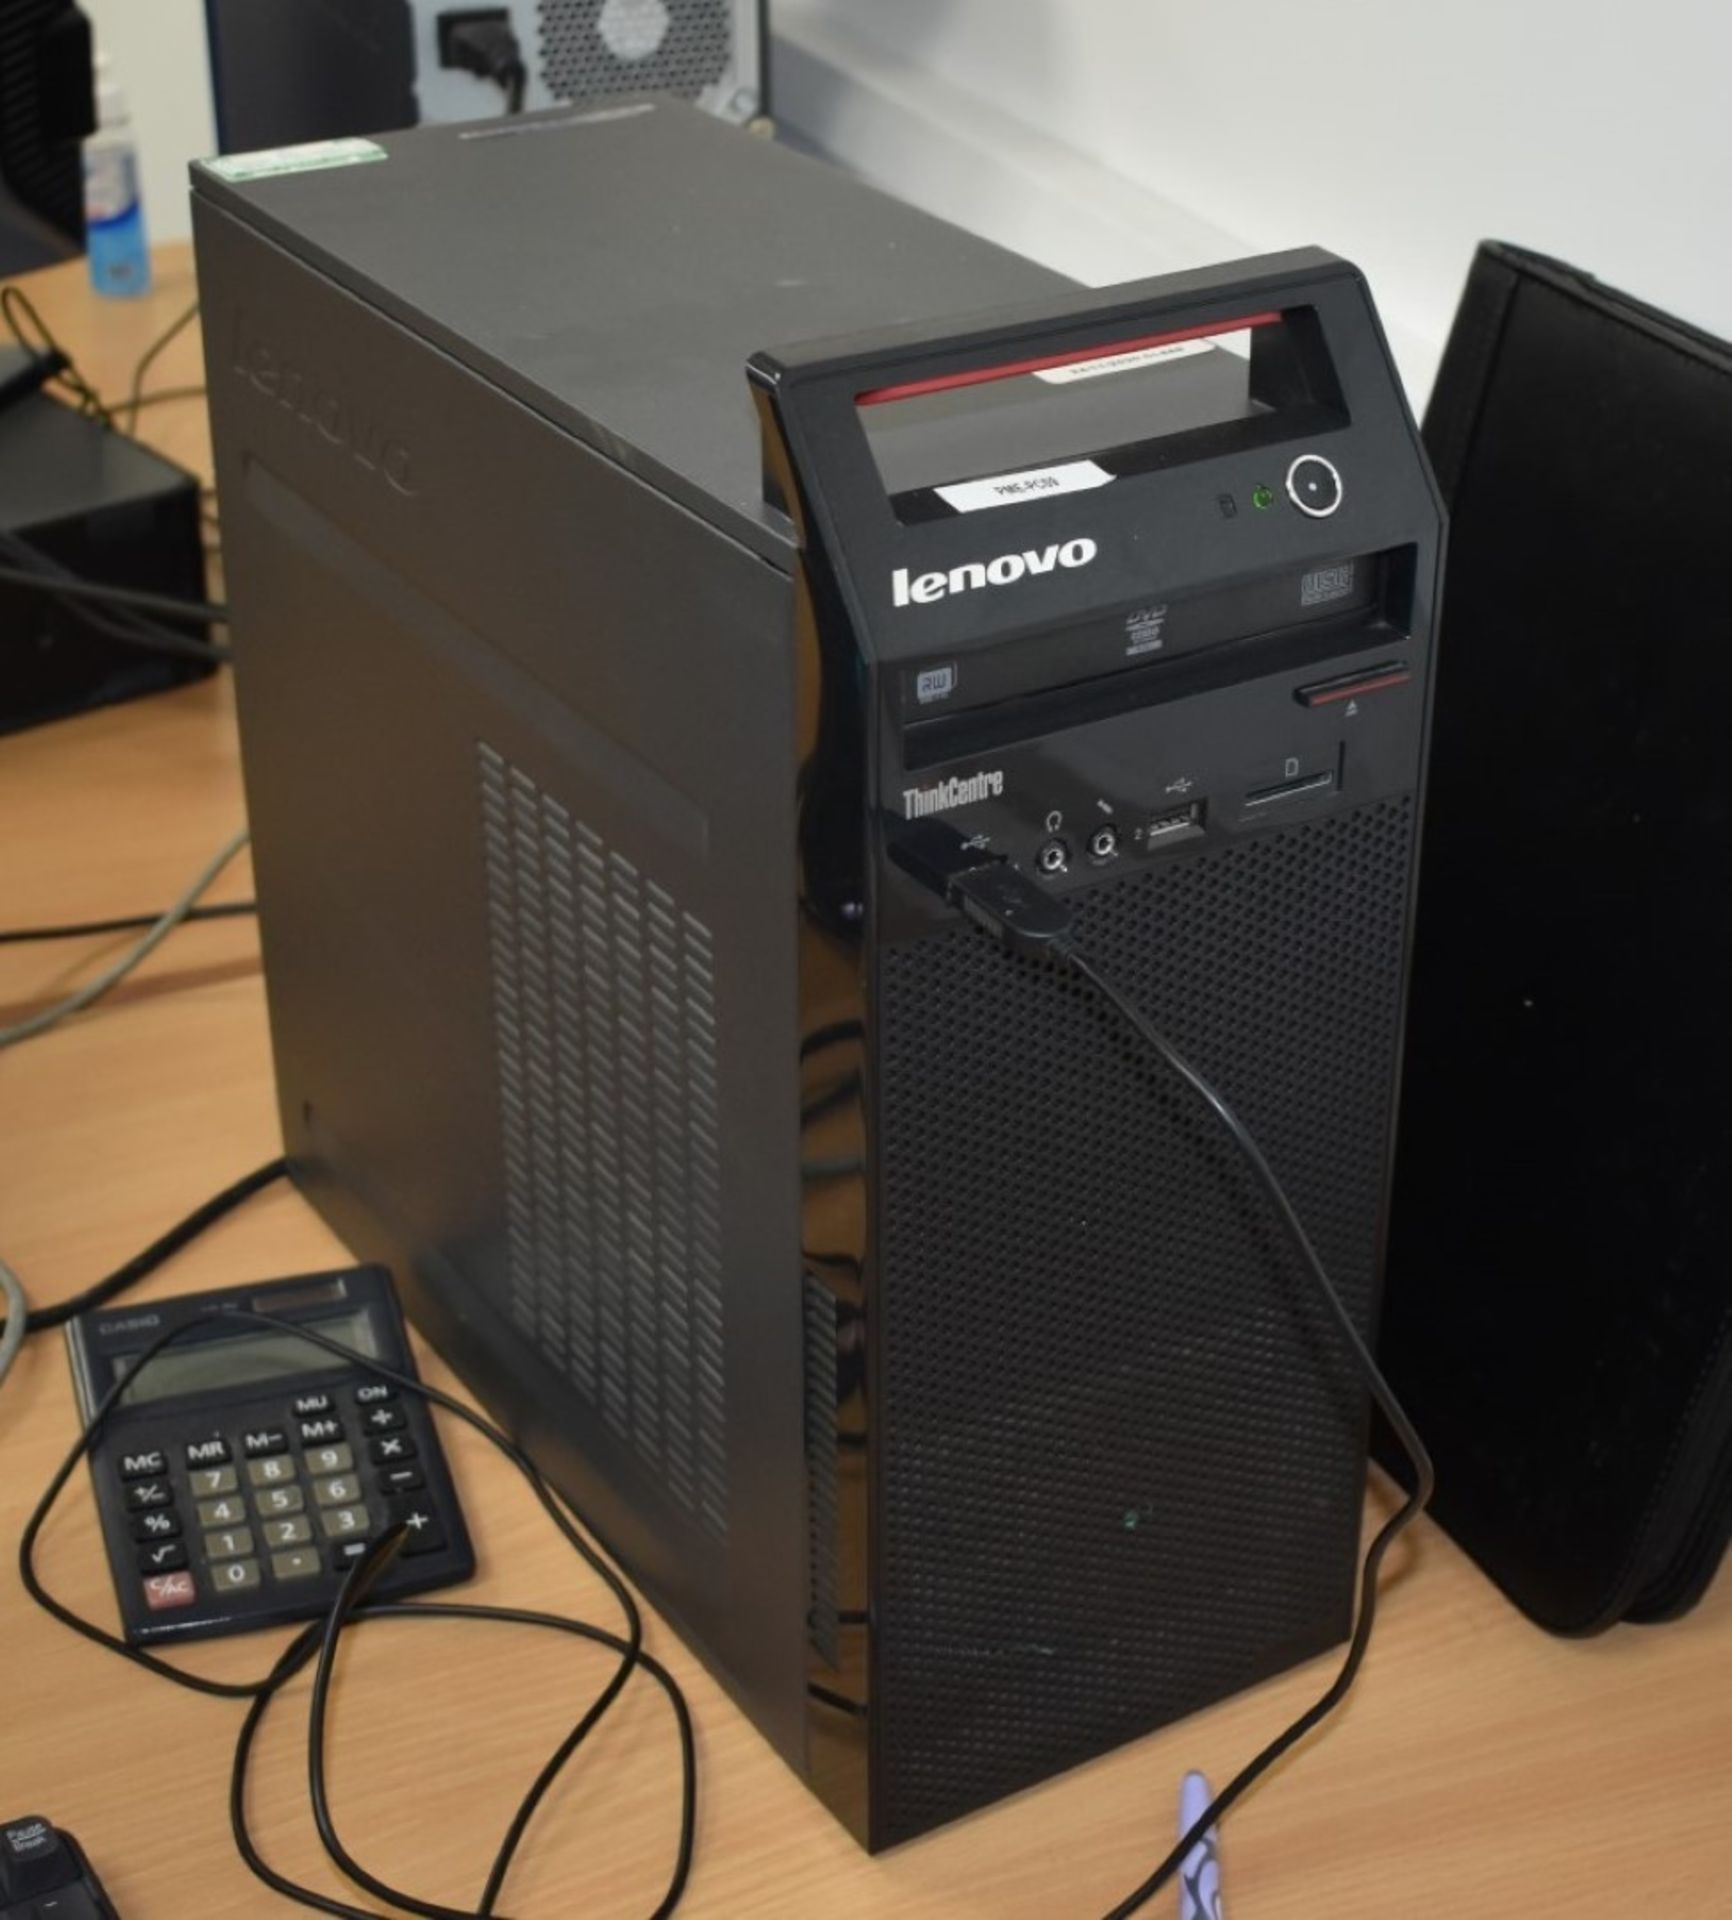 1 x Lenovo Desktop Computer Features an Intel i34130 Processor With 8gb Ram Includes Monitor - Image 2 of 3